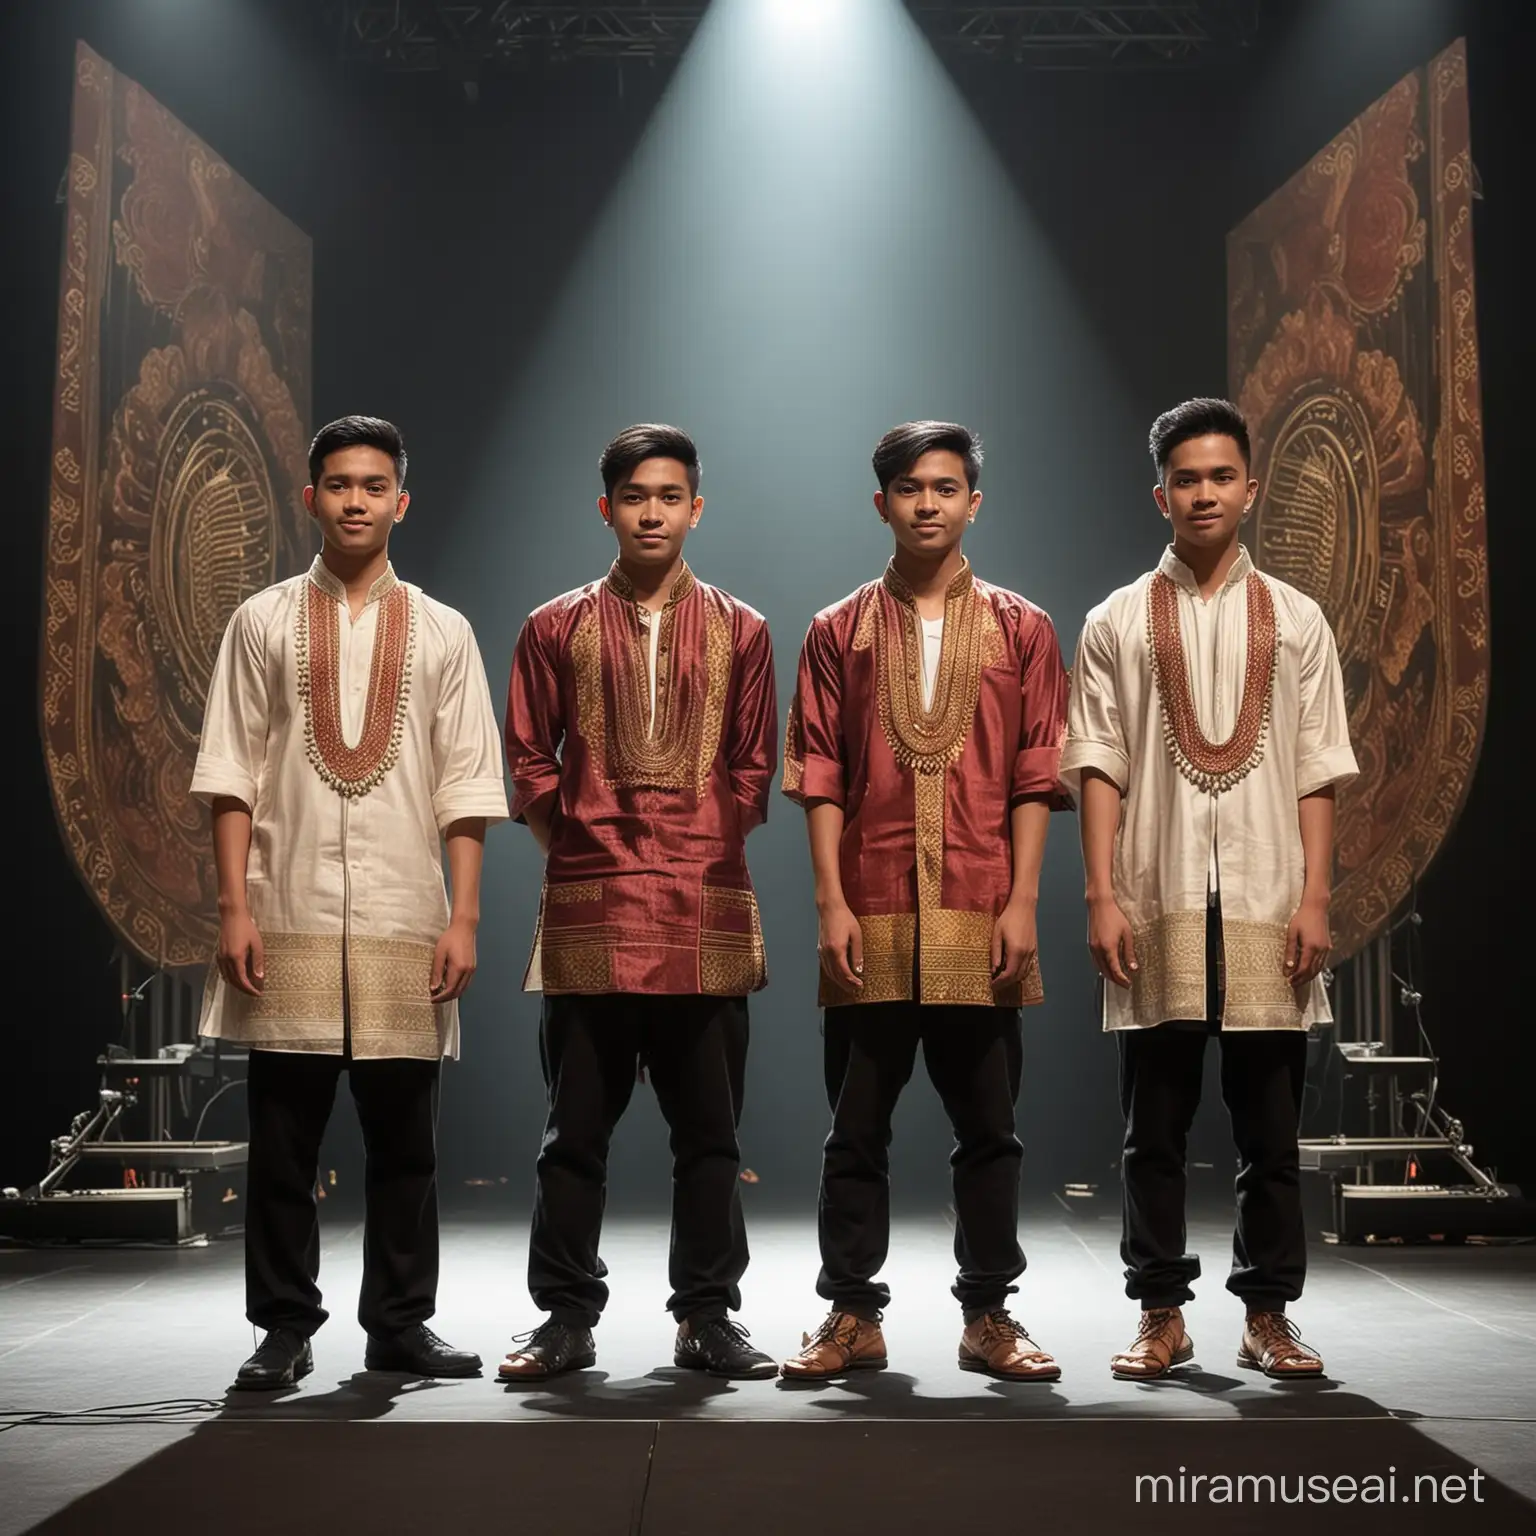 Indonesian Male Artists Performing with Musicians on Magnificent Stage